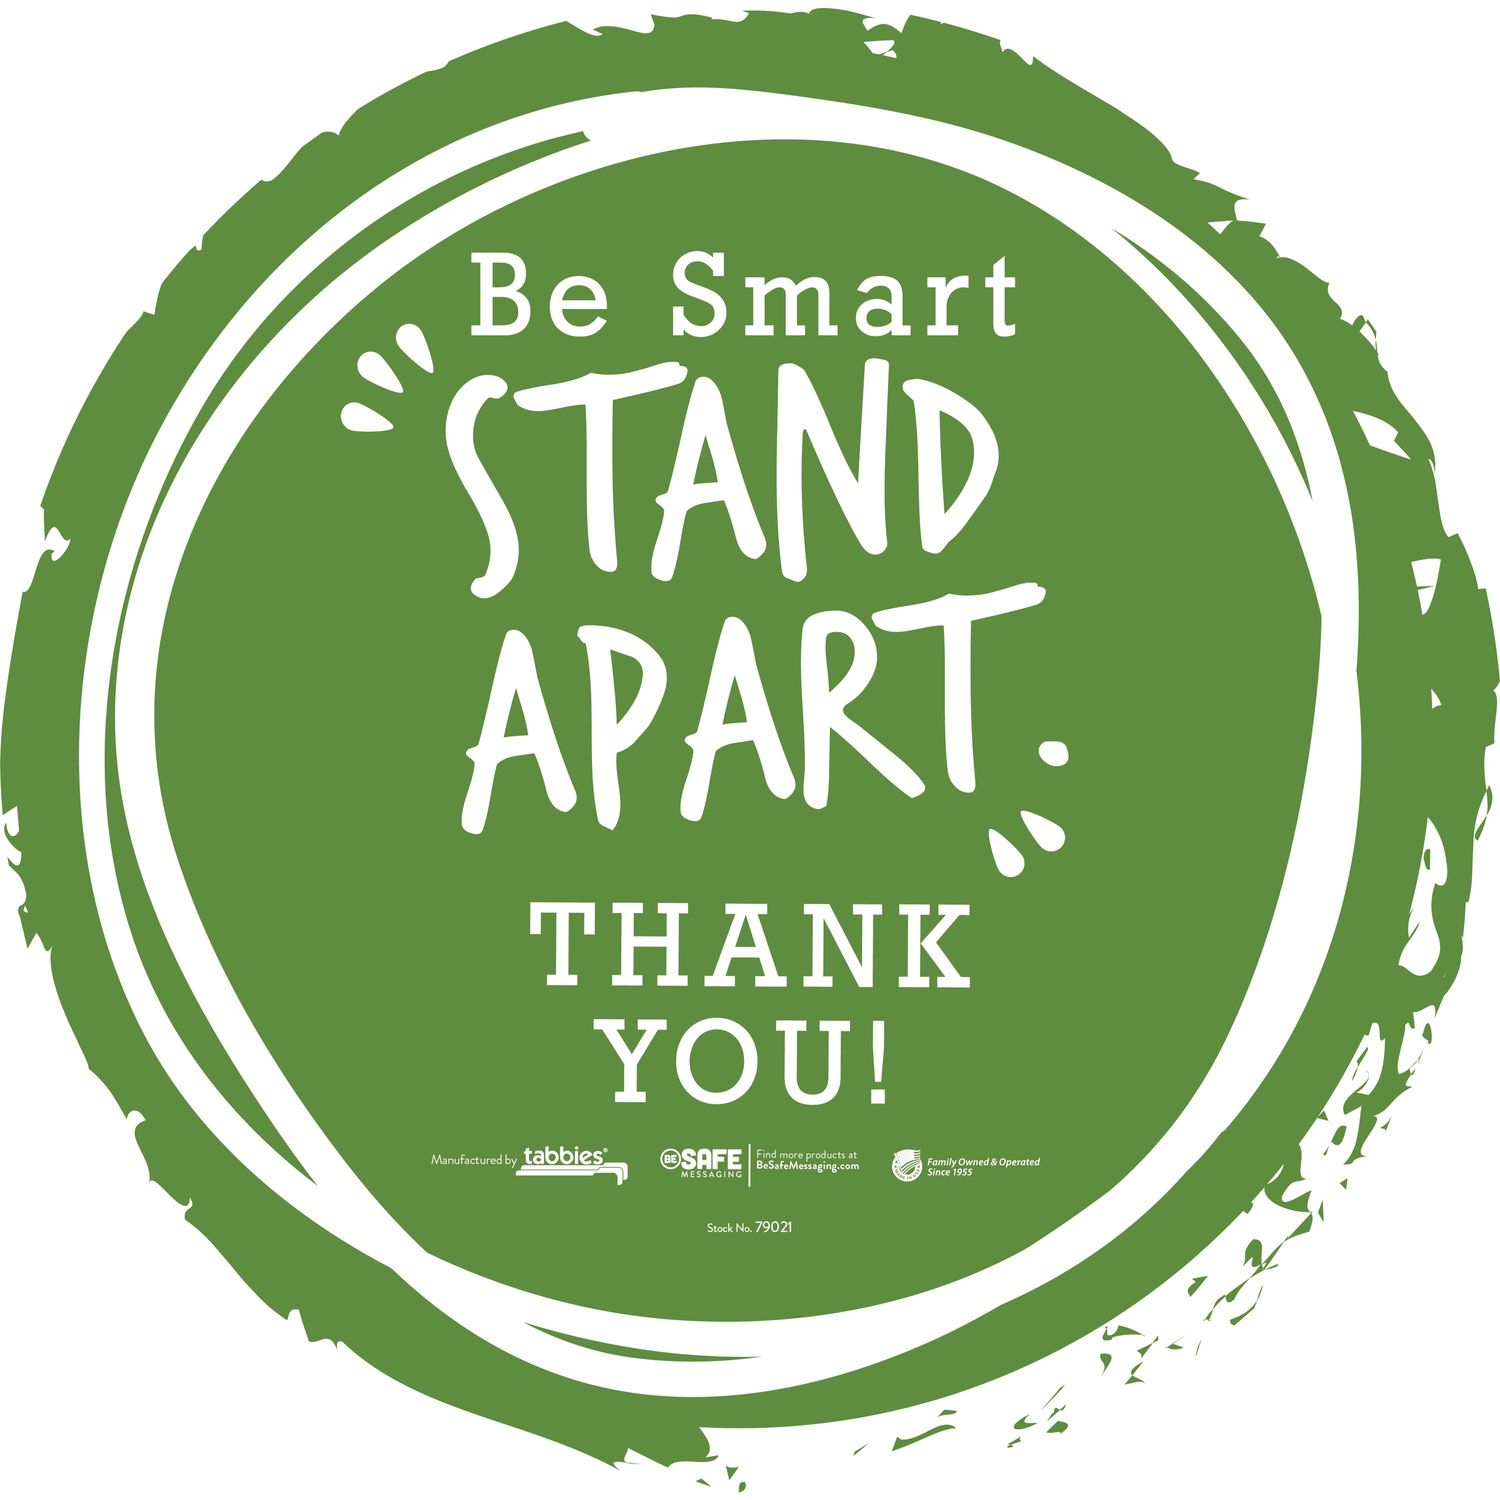 STAND APART THANK YOU Floor Decal 6 / Carton, Be Smart Stay Apart Print/Message, 12" Width x 12" Height, Circle Shape, Anti-slip, Repositionable, Adhesive, Vinyl, Green